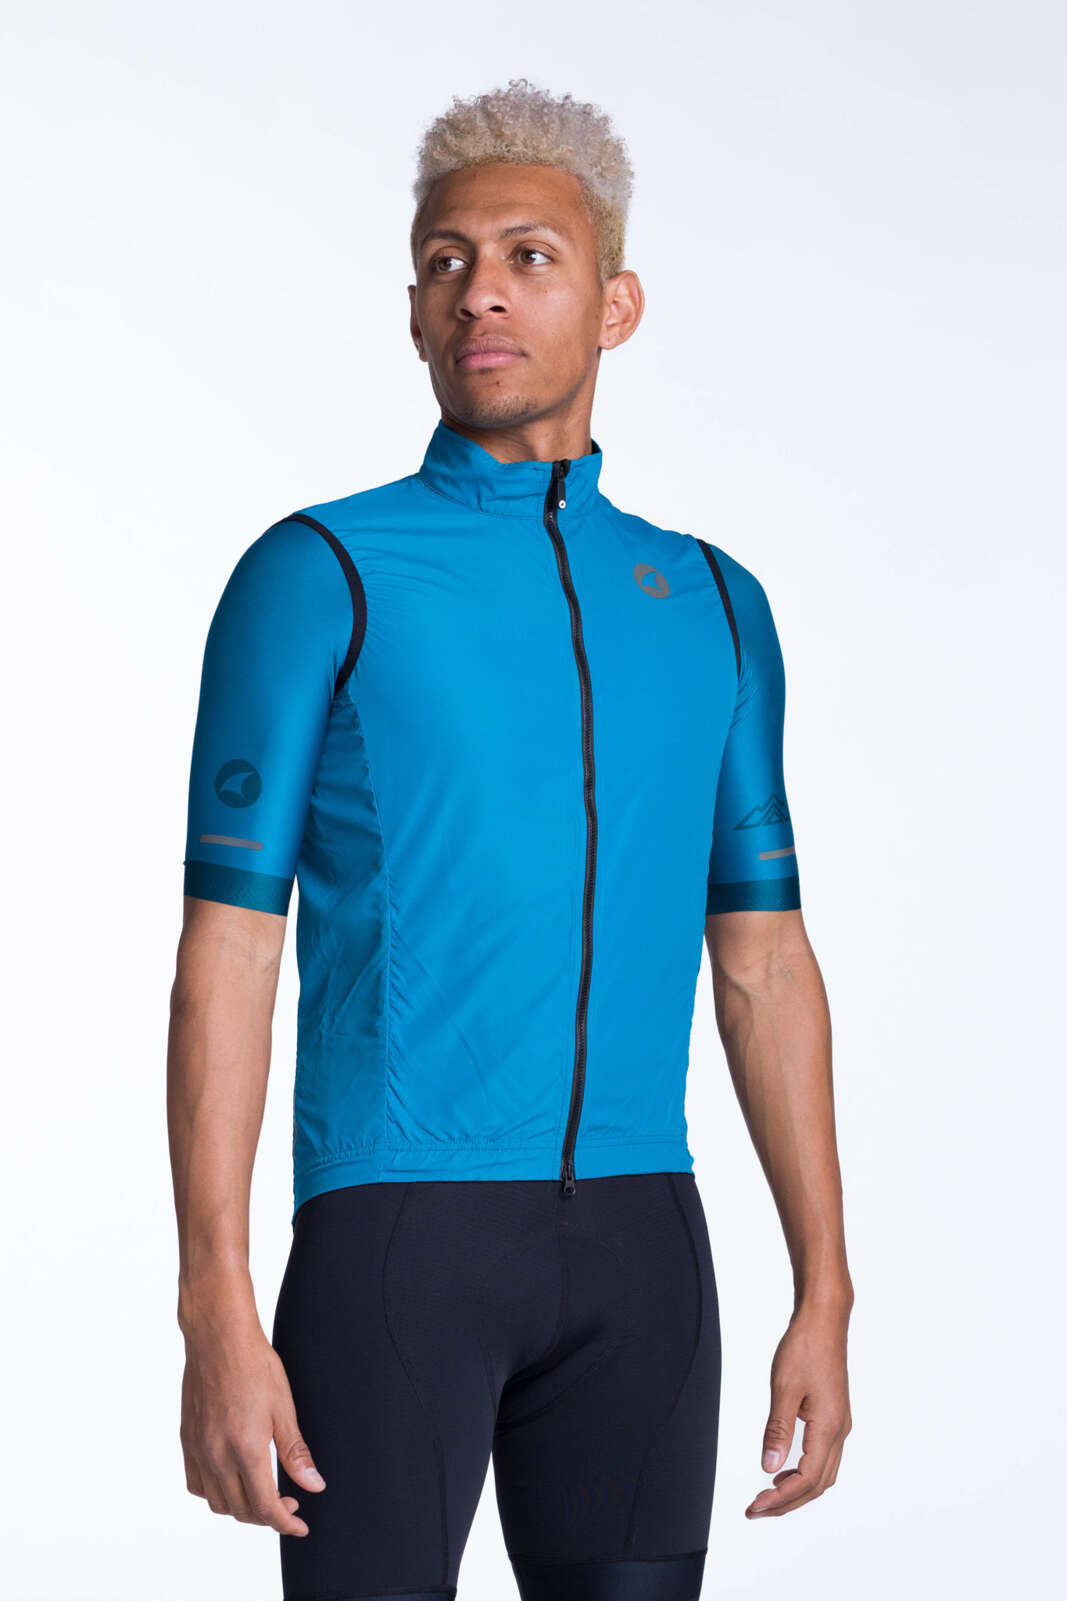 Men's Teal Packable Cycling Wind Vest - Front View